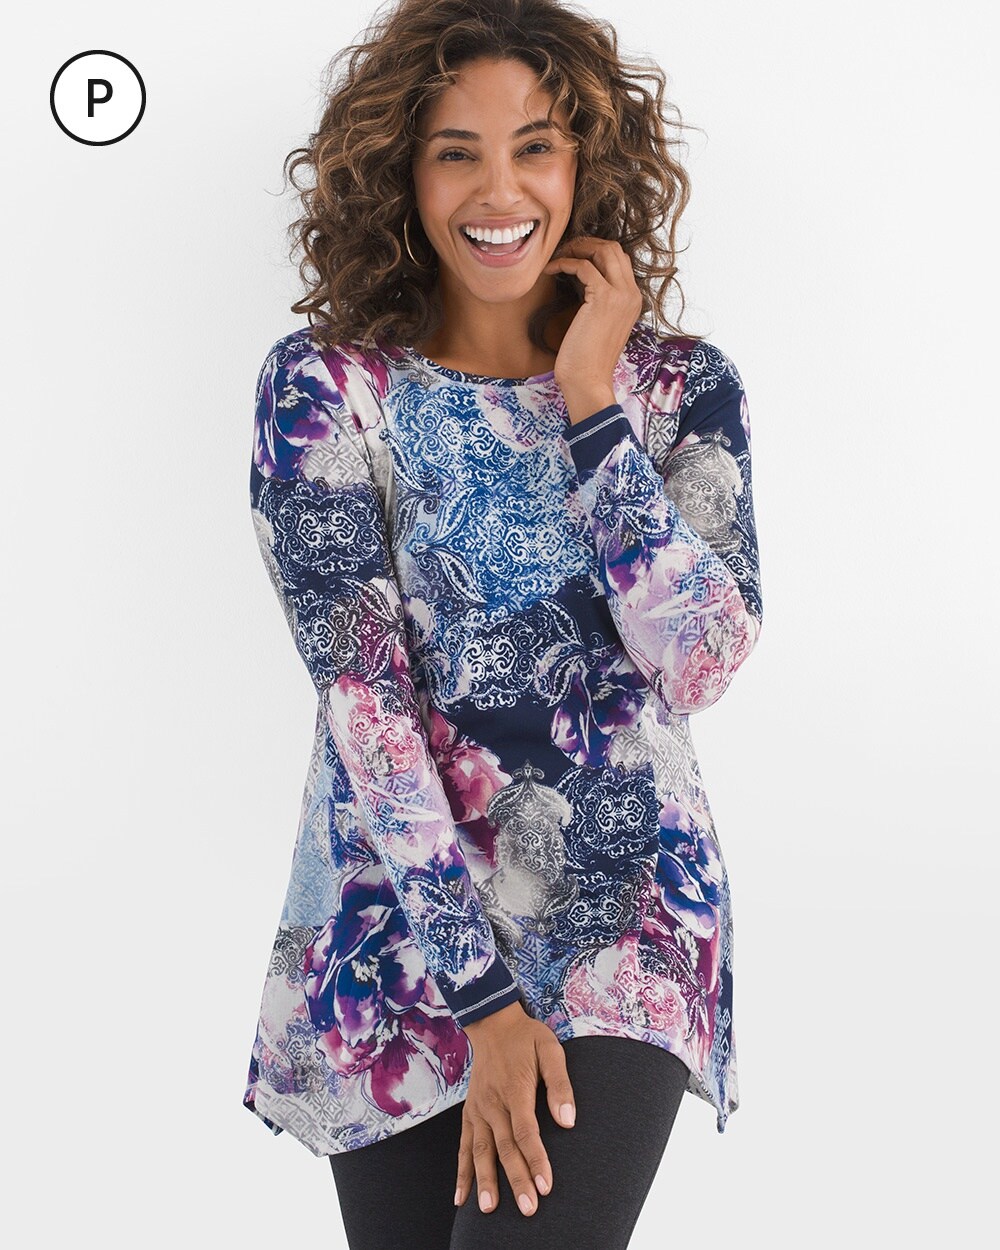 Zenergy Petite Cool Floral Tunic